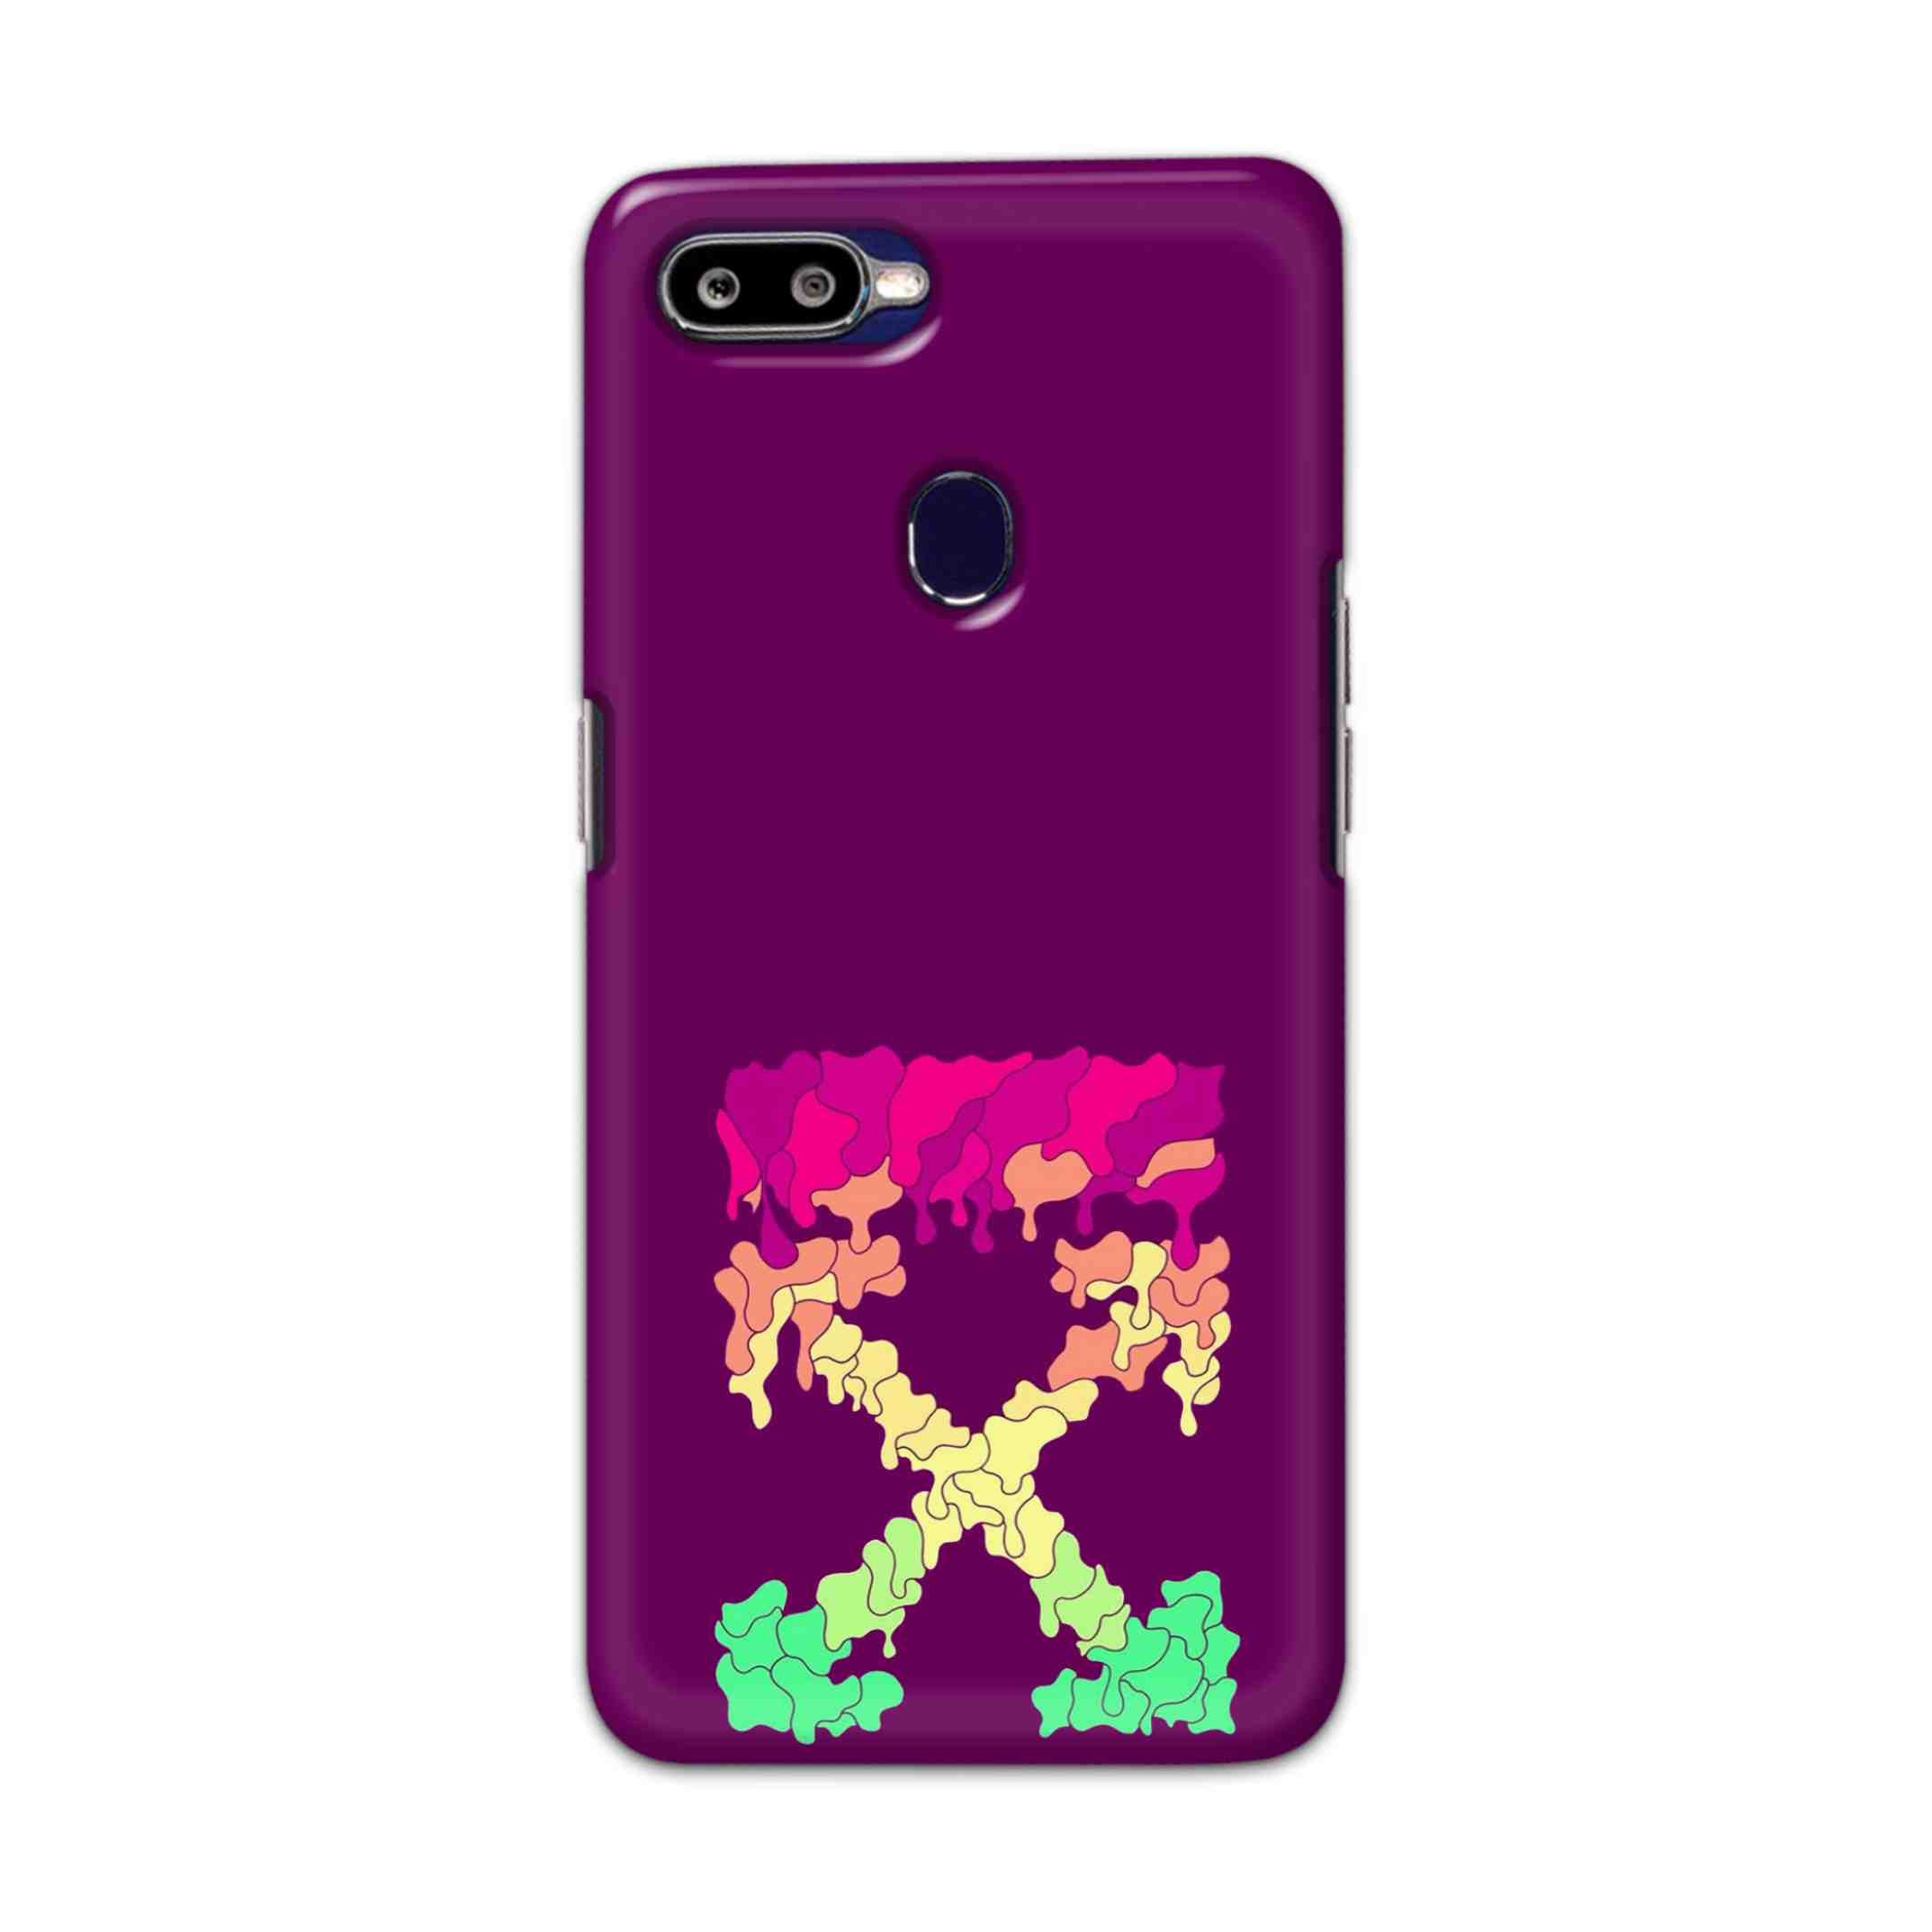 Buy X.O Hard Back Mobile Phone Case/Cover For Oppo F9 / F9 Pro Online